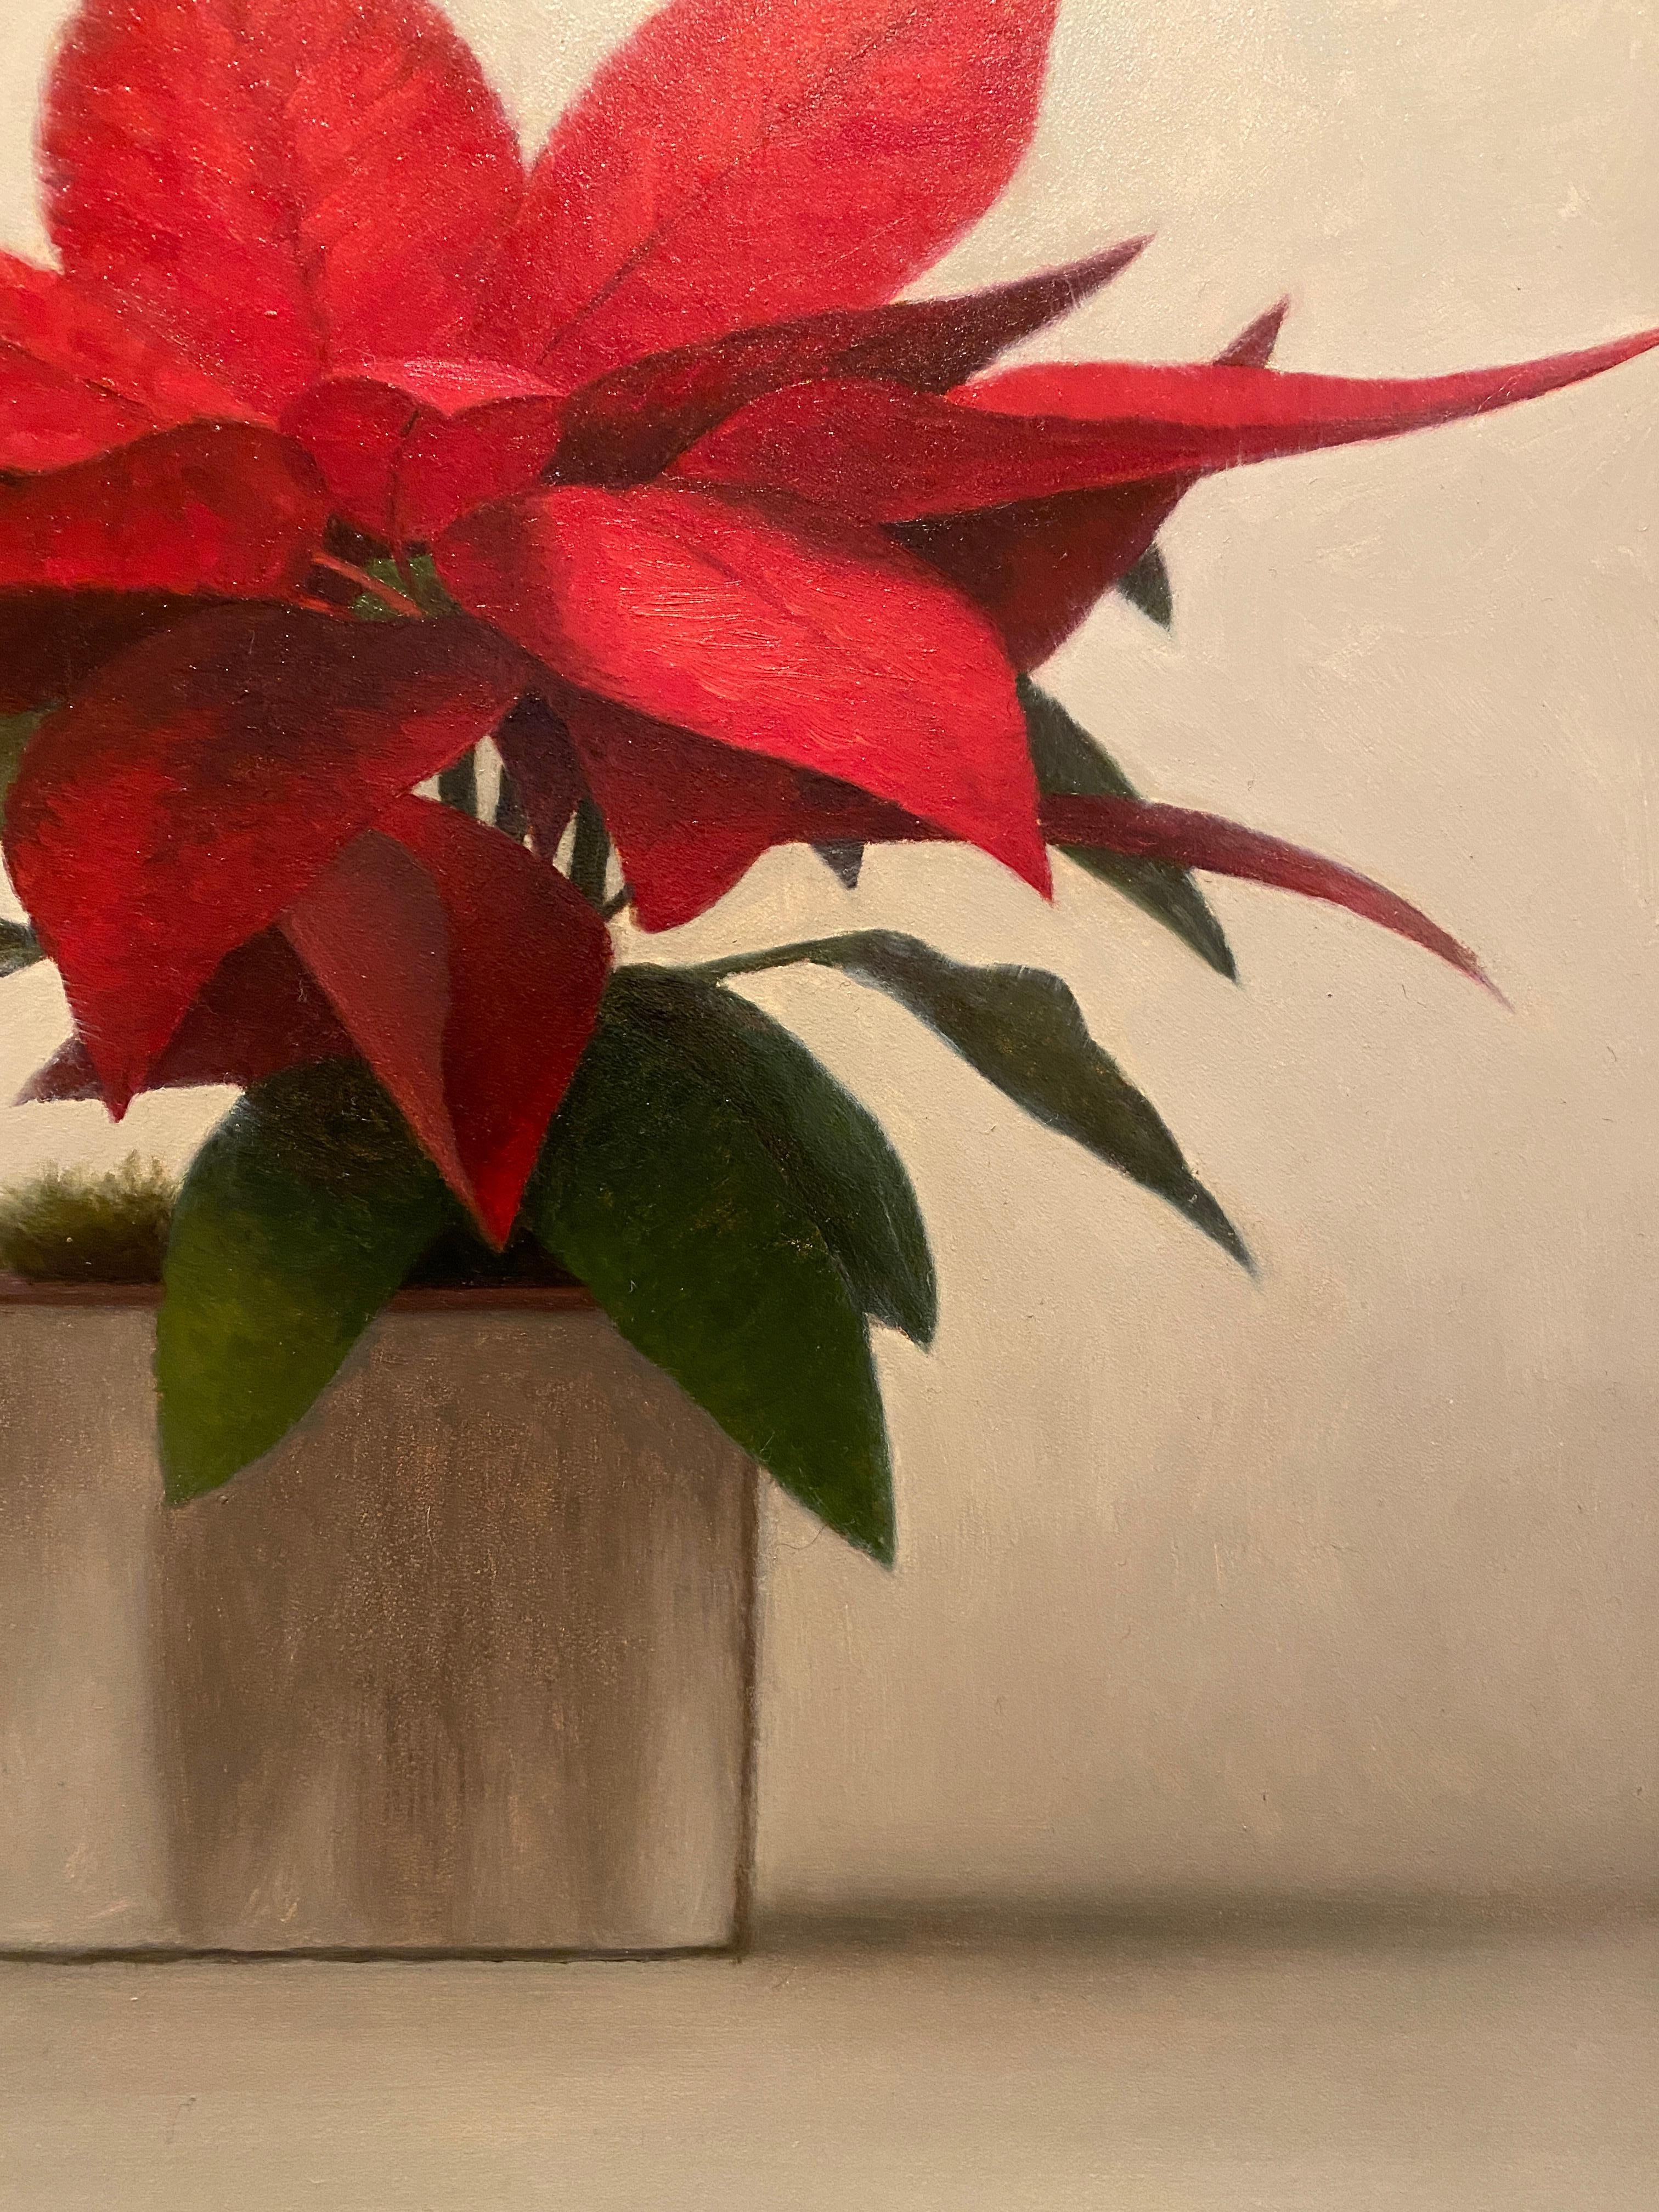 Poinsettia 2 - American Realist Painting by Matthew Weigle